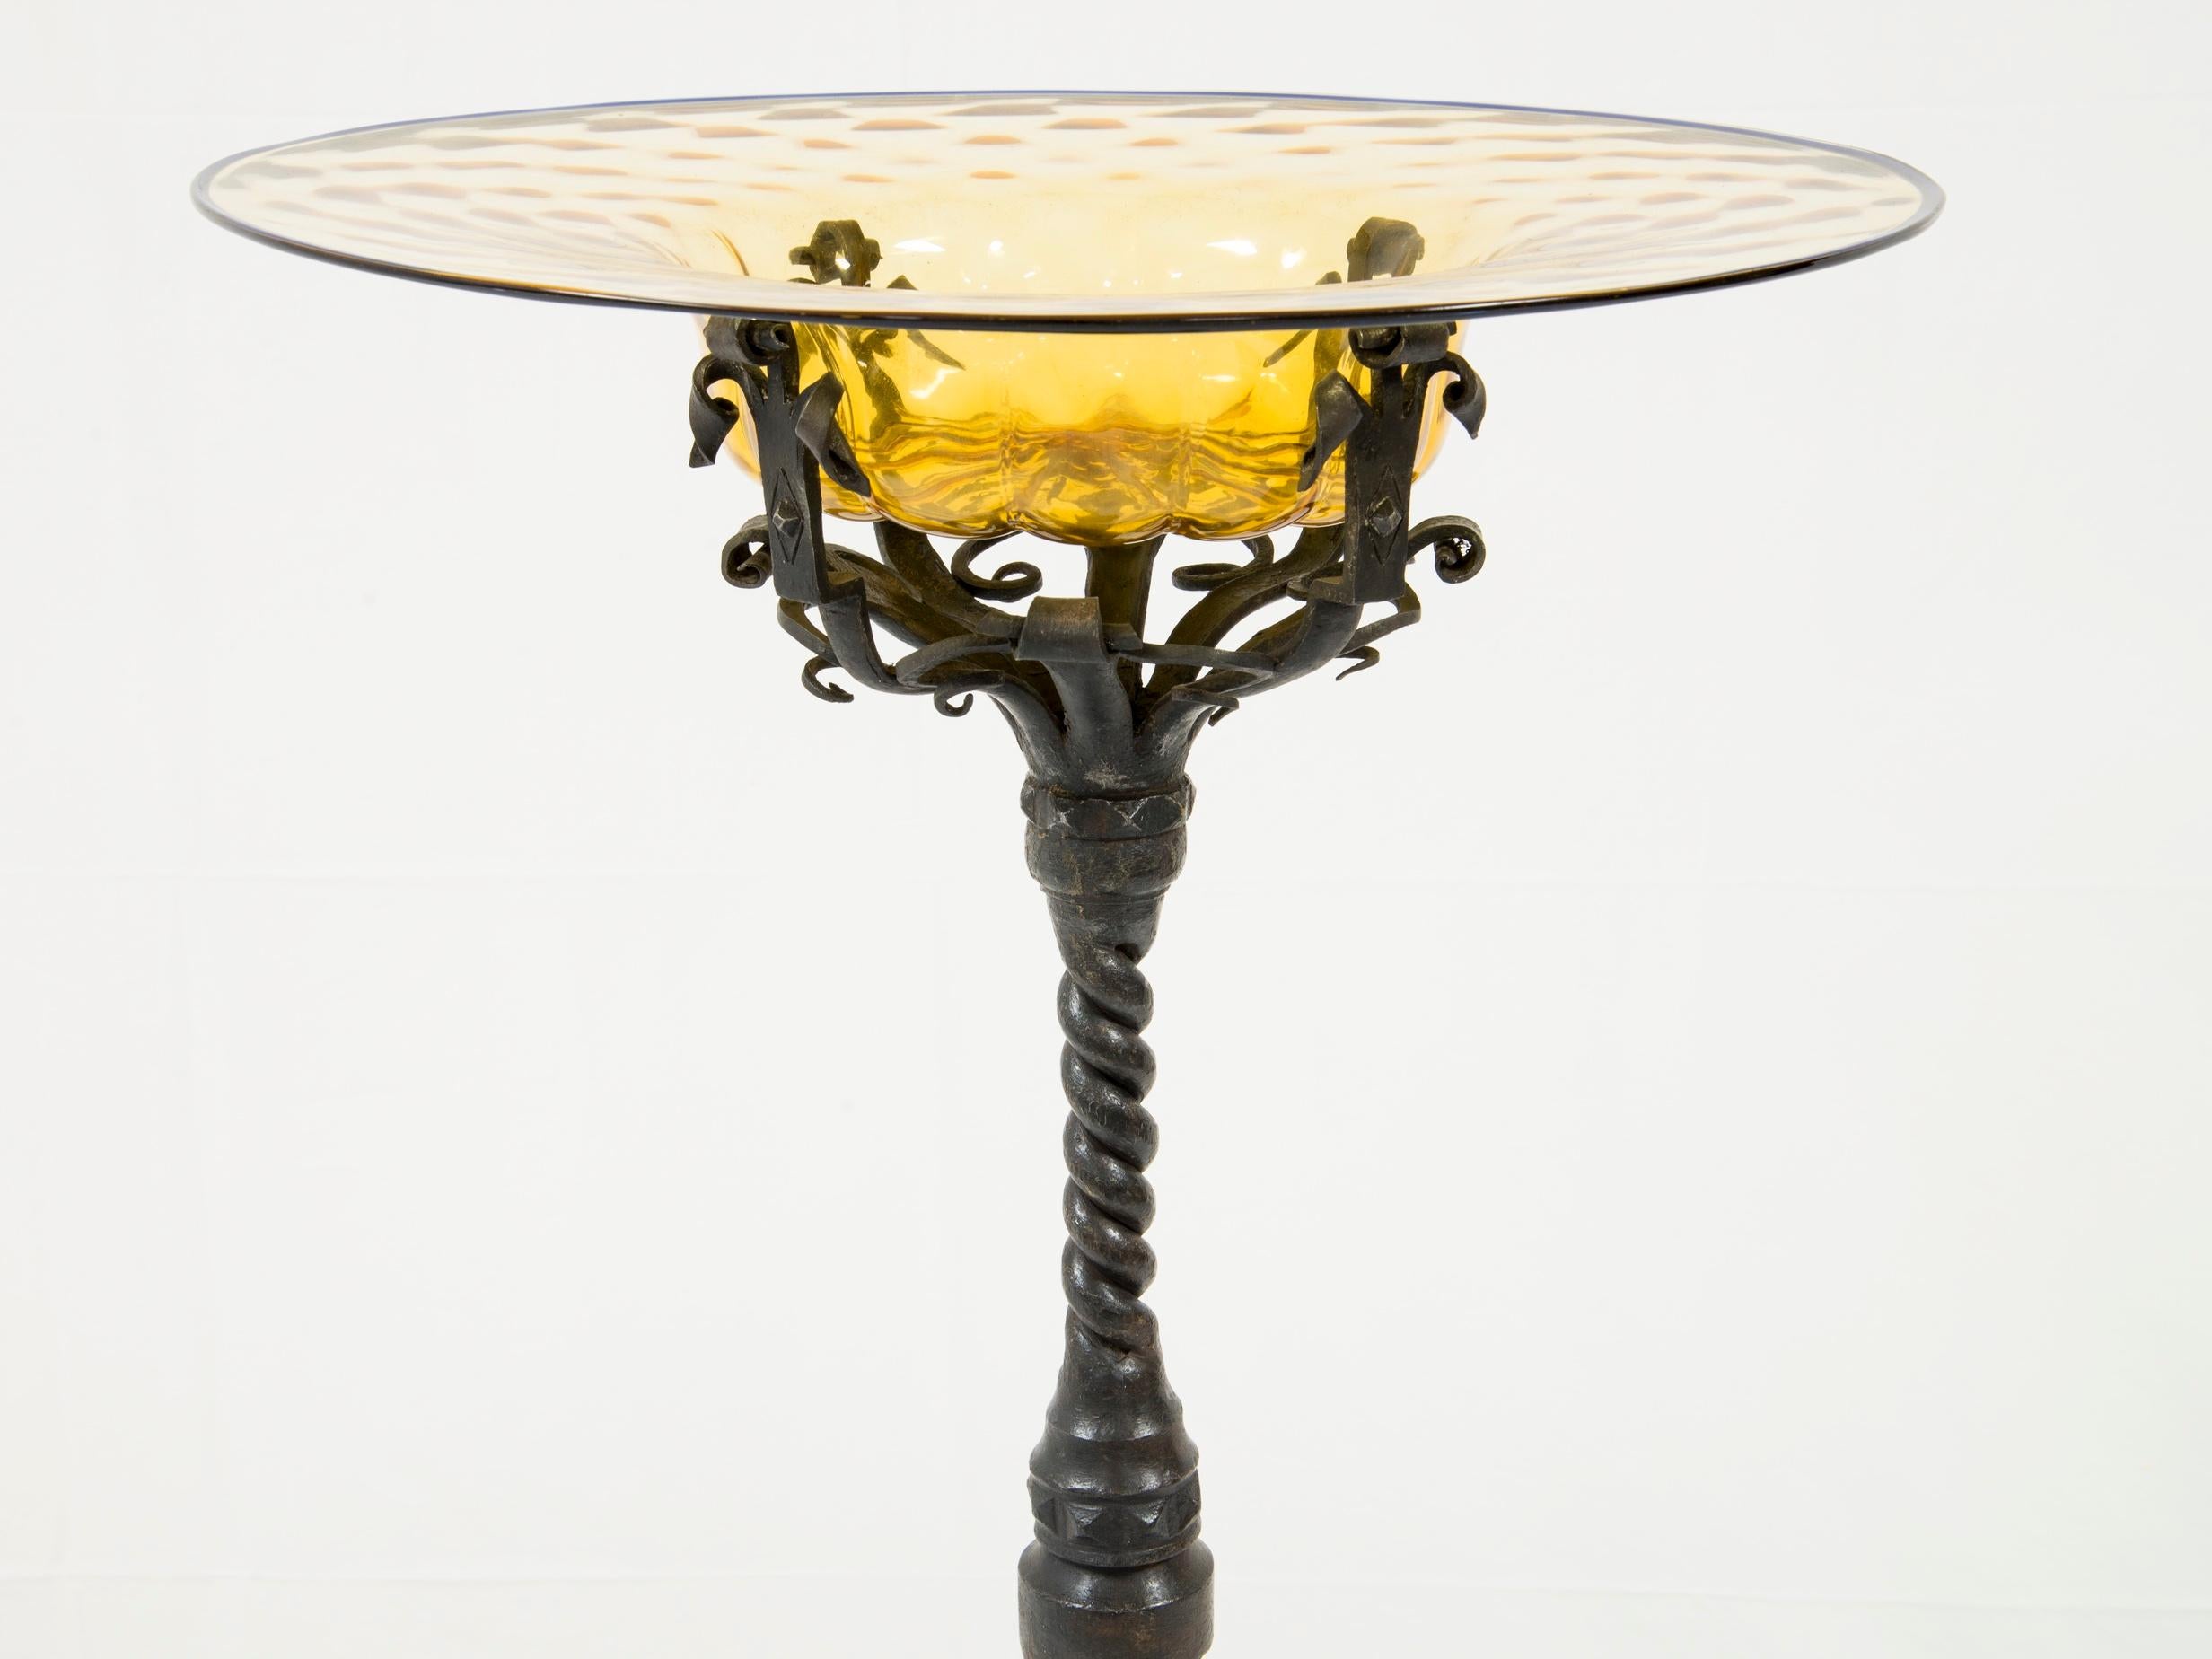 Carlo Rizzarda
Cup
Glass and wrought iron
Italy, circa 1915
Measures: H 74 x L 47 cm

This work is typical of Italian production from the Liberty period.